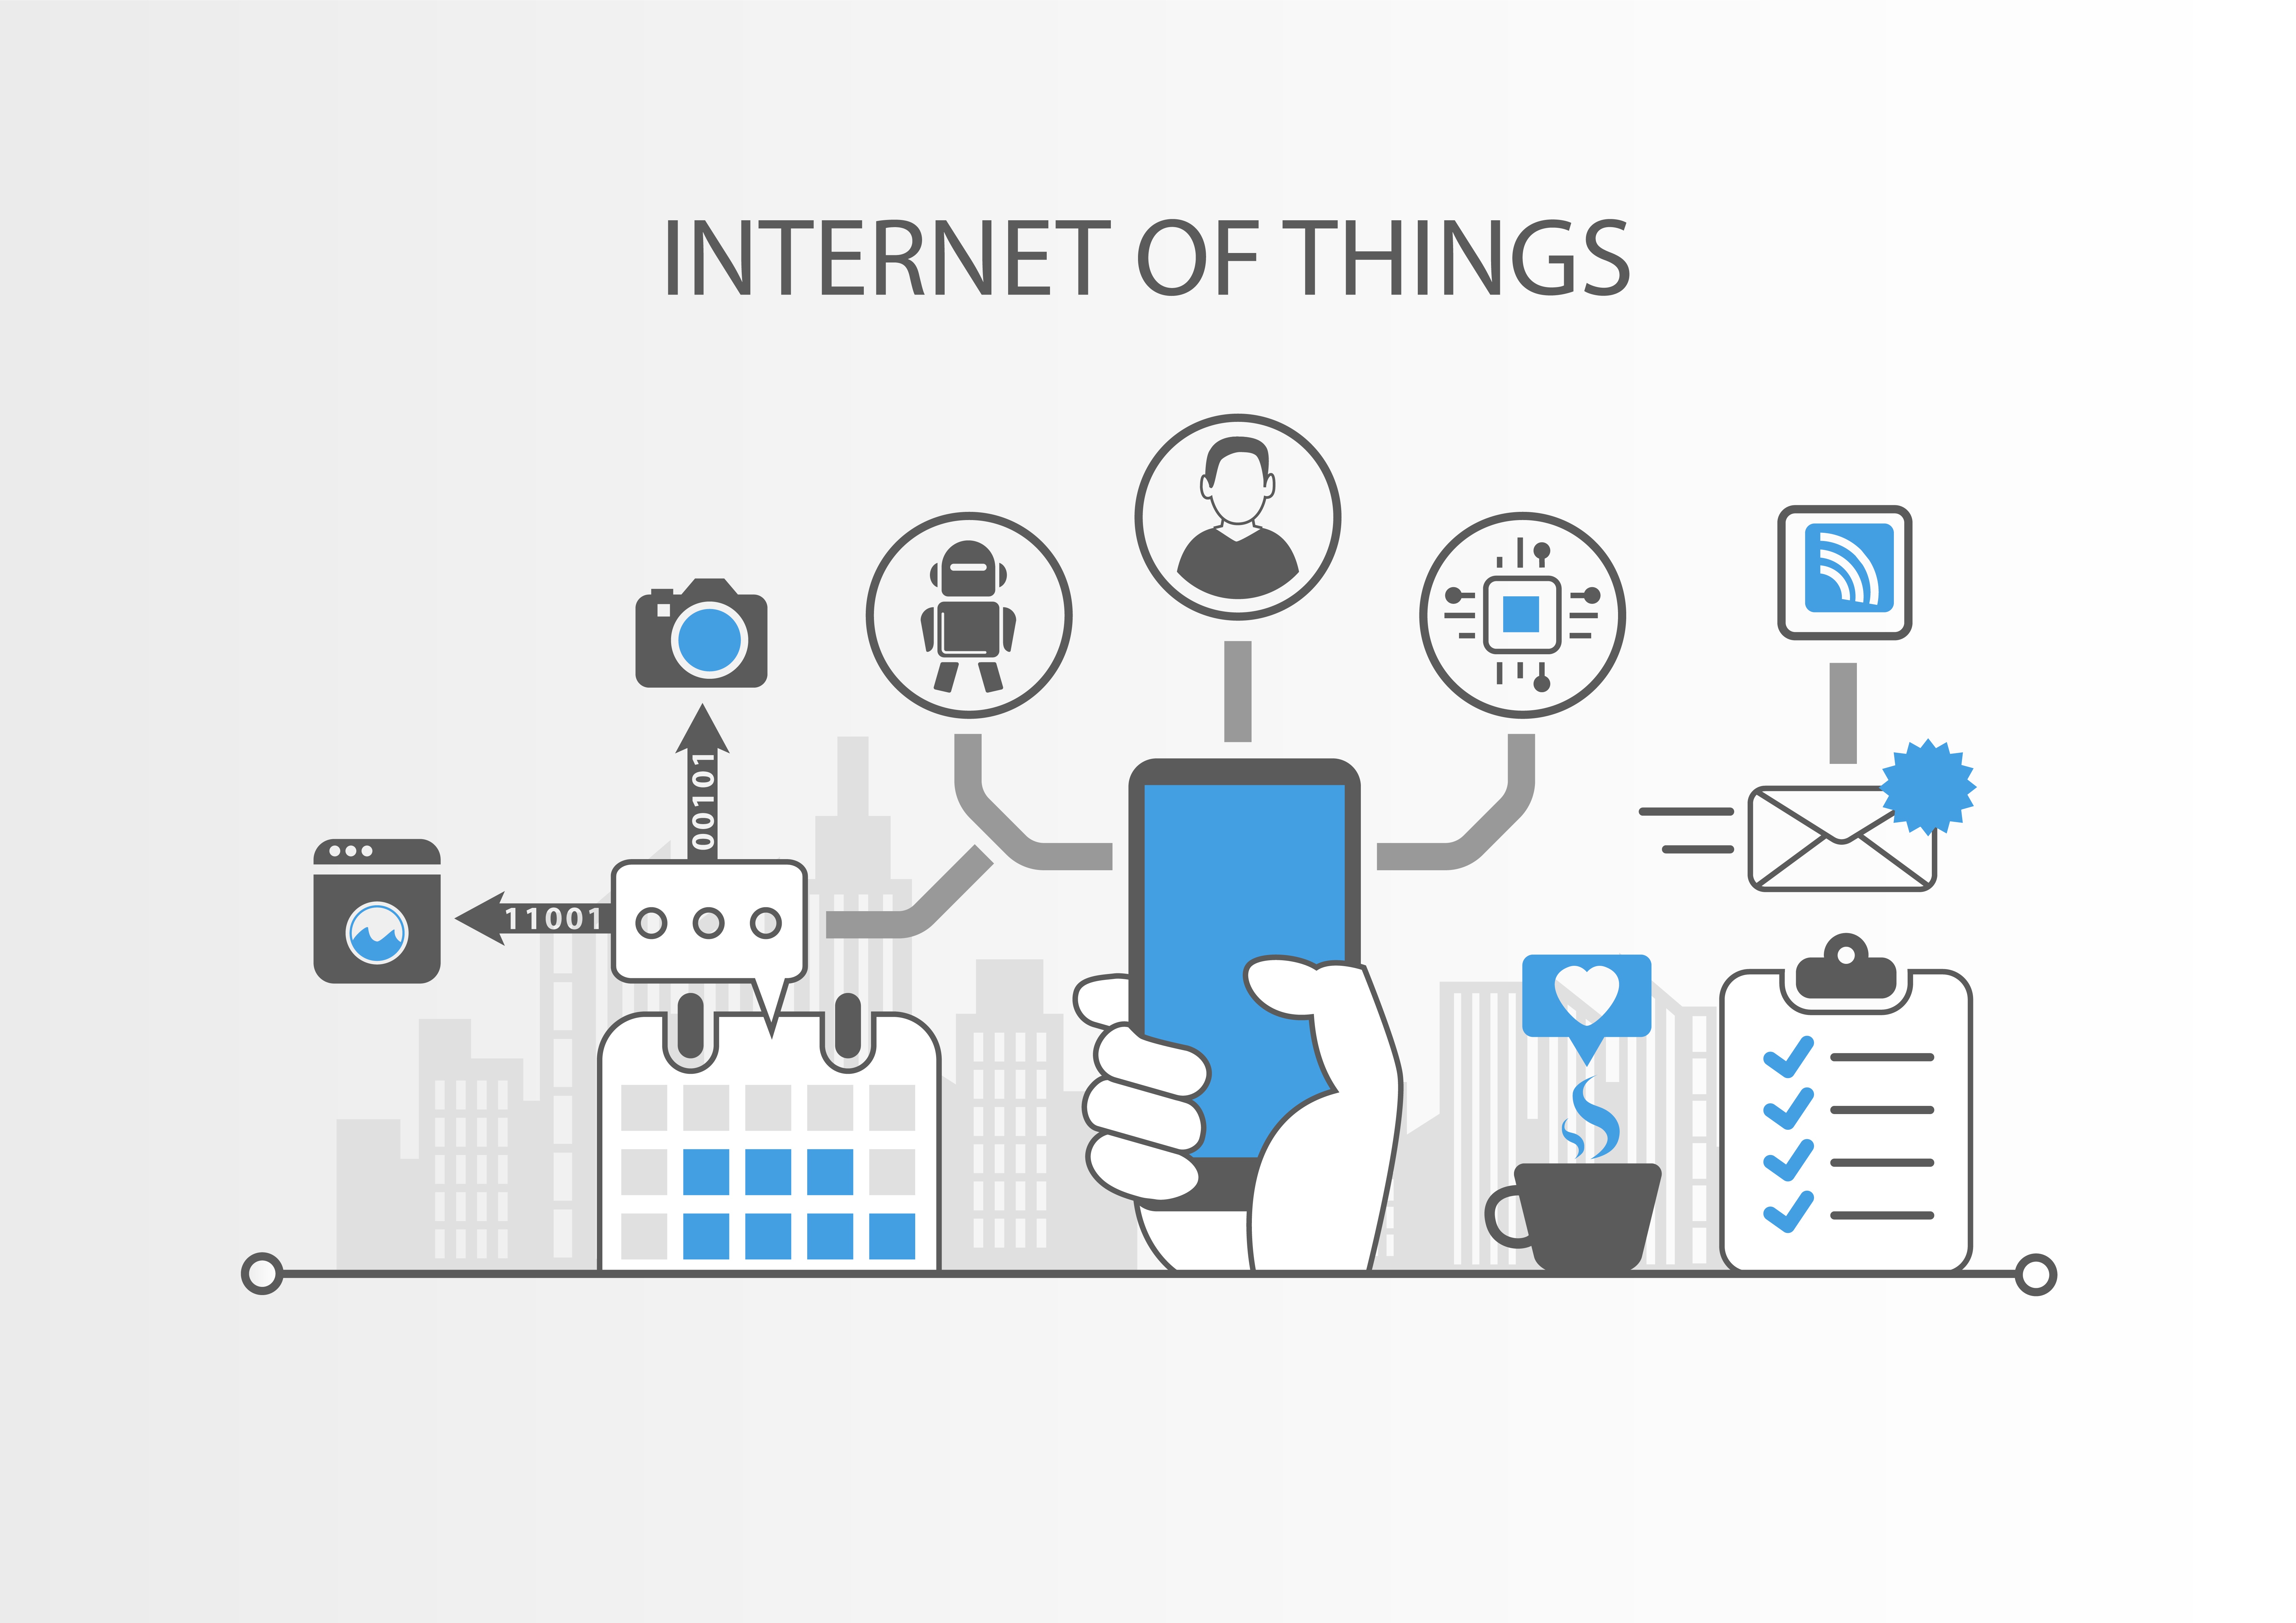 What is the internet of things (IoT)?